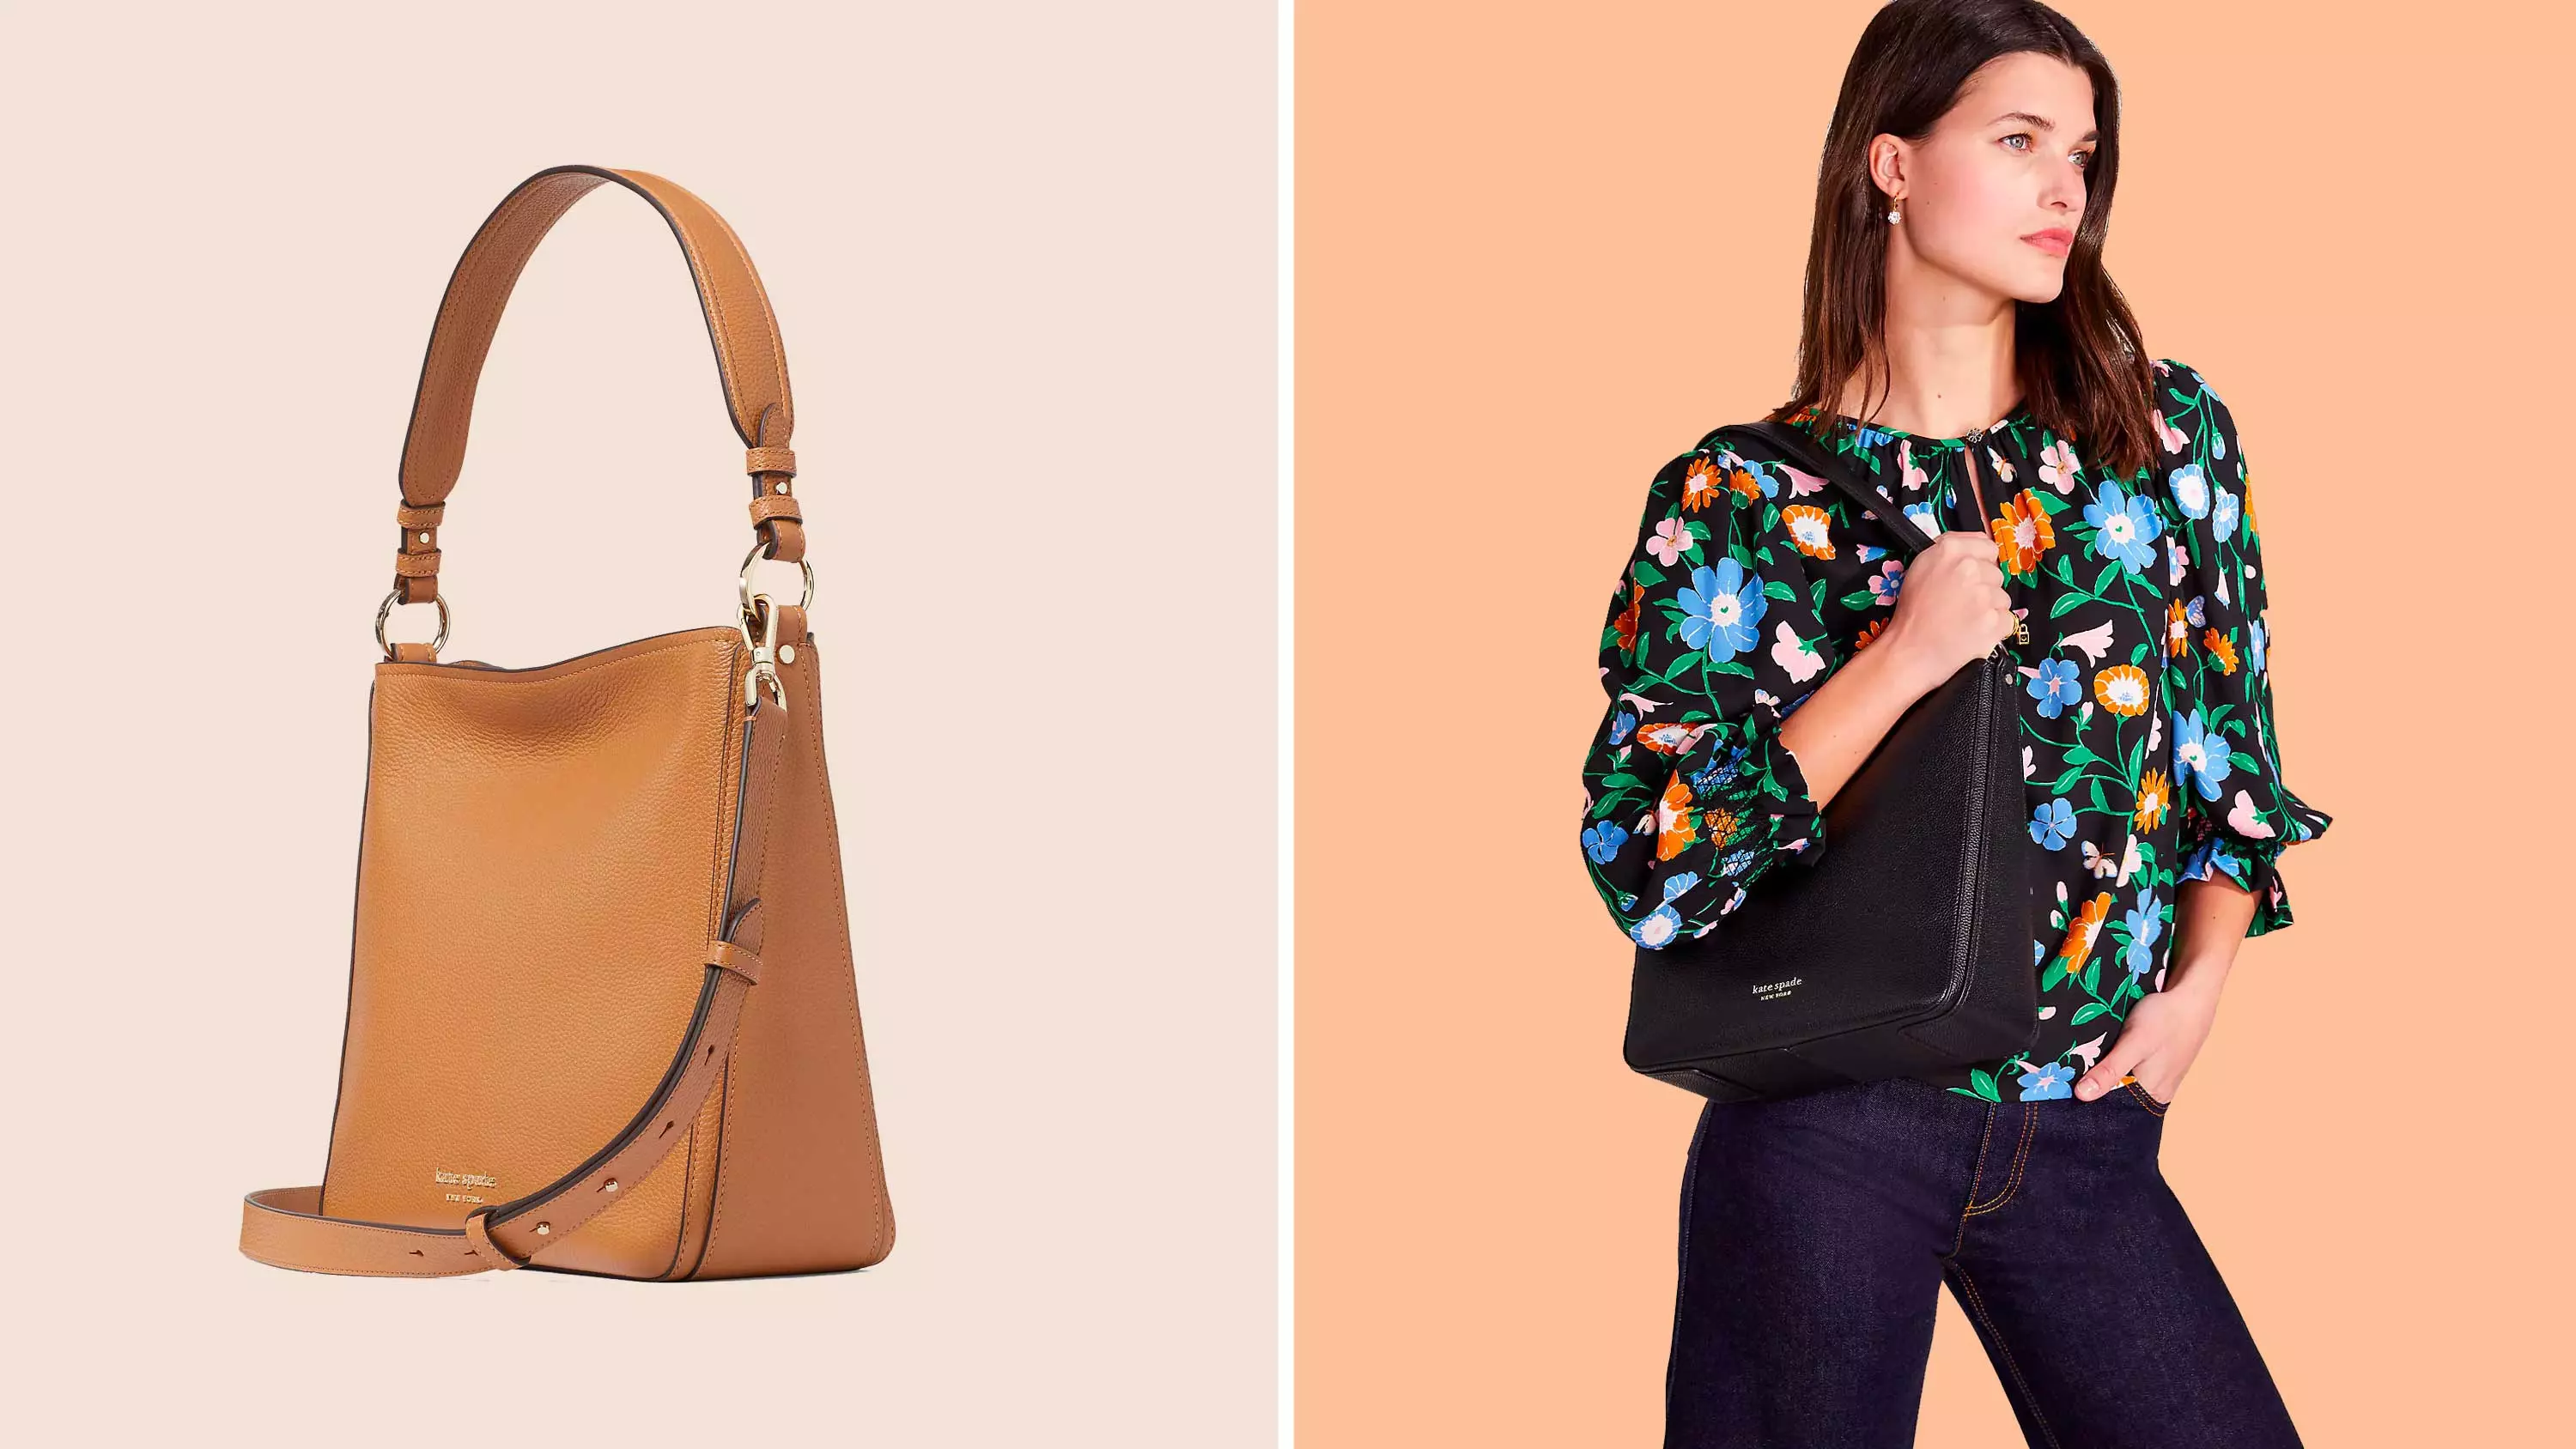 The Kate Spade Hudson Large Hobo Bag is a timeless accessory that will work all year long.